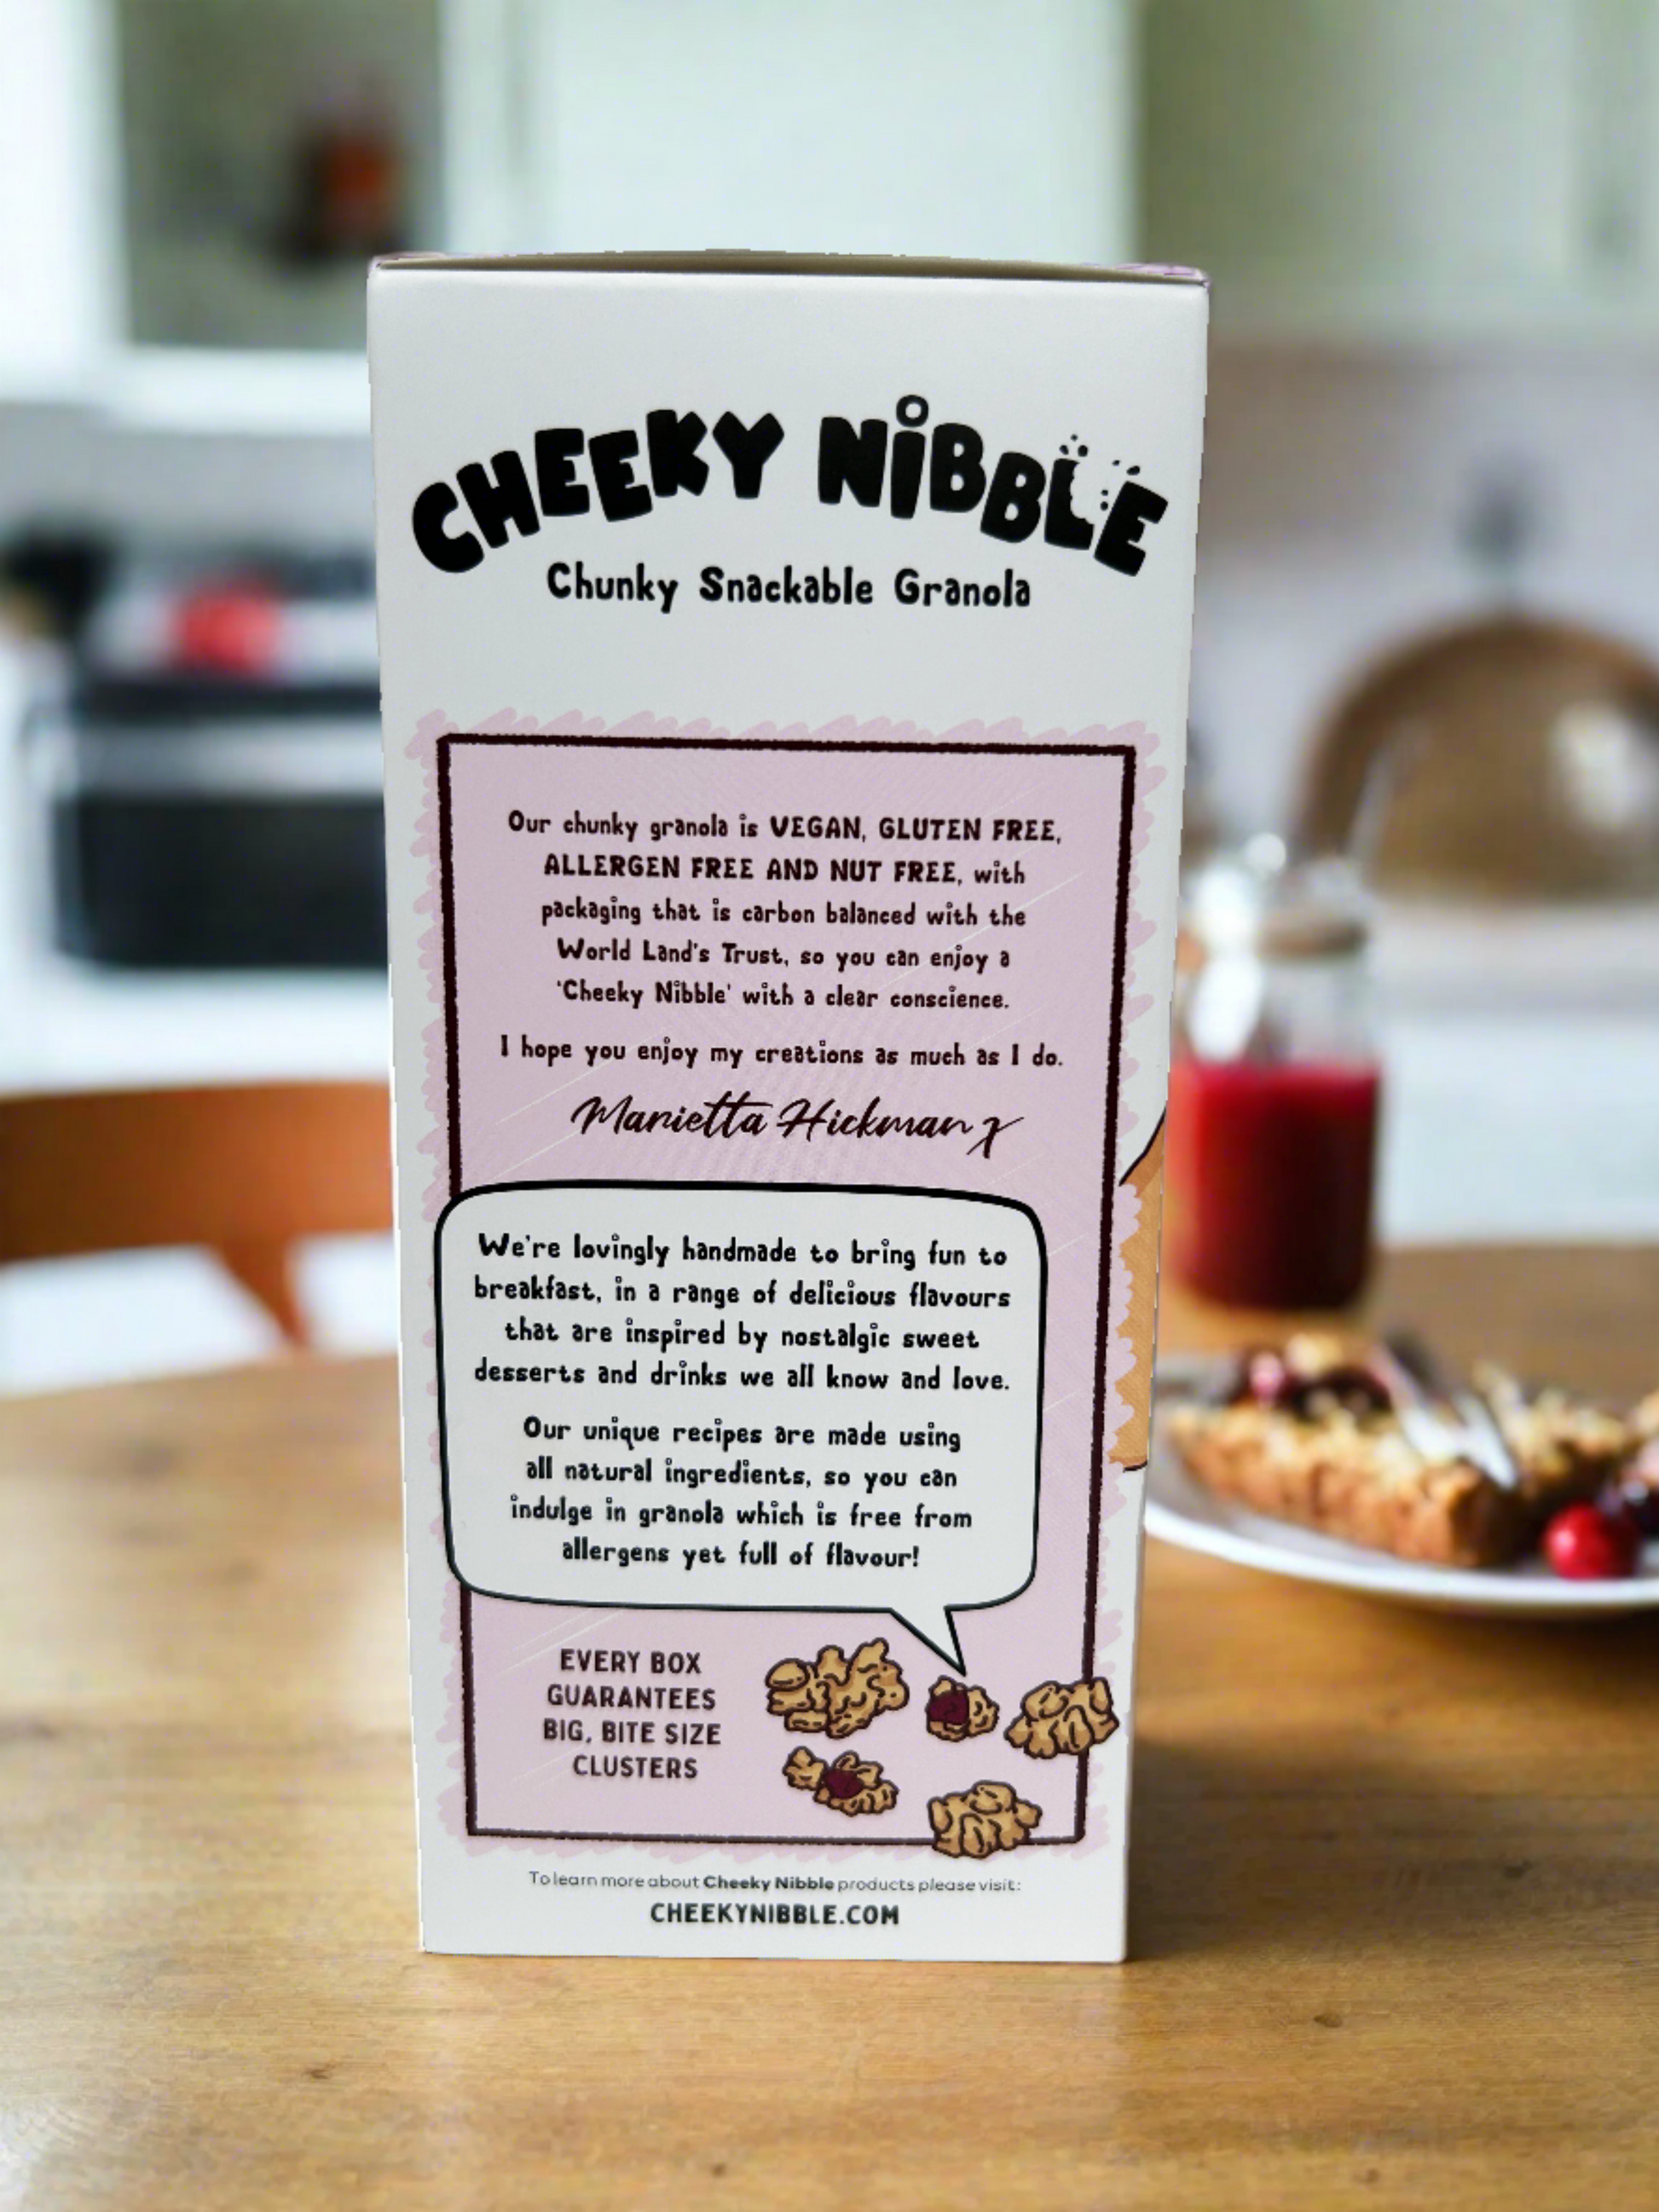 The cereal box showcases a close-up image of the mouthwatering granola chunks featured in Cherry Bakewell Granola. Each chunk is depicted with intricate detail, highlighting its hearty texture and flavorful blend cherries, and oats.  Text on the box may describe the crunchy, nutty sweetness of the granola, enticing consumers with promises of a delicious breakfast or snack option reminiscent of the classic dessert.